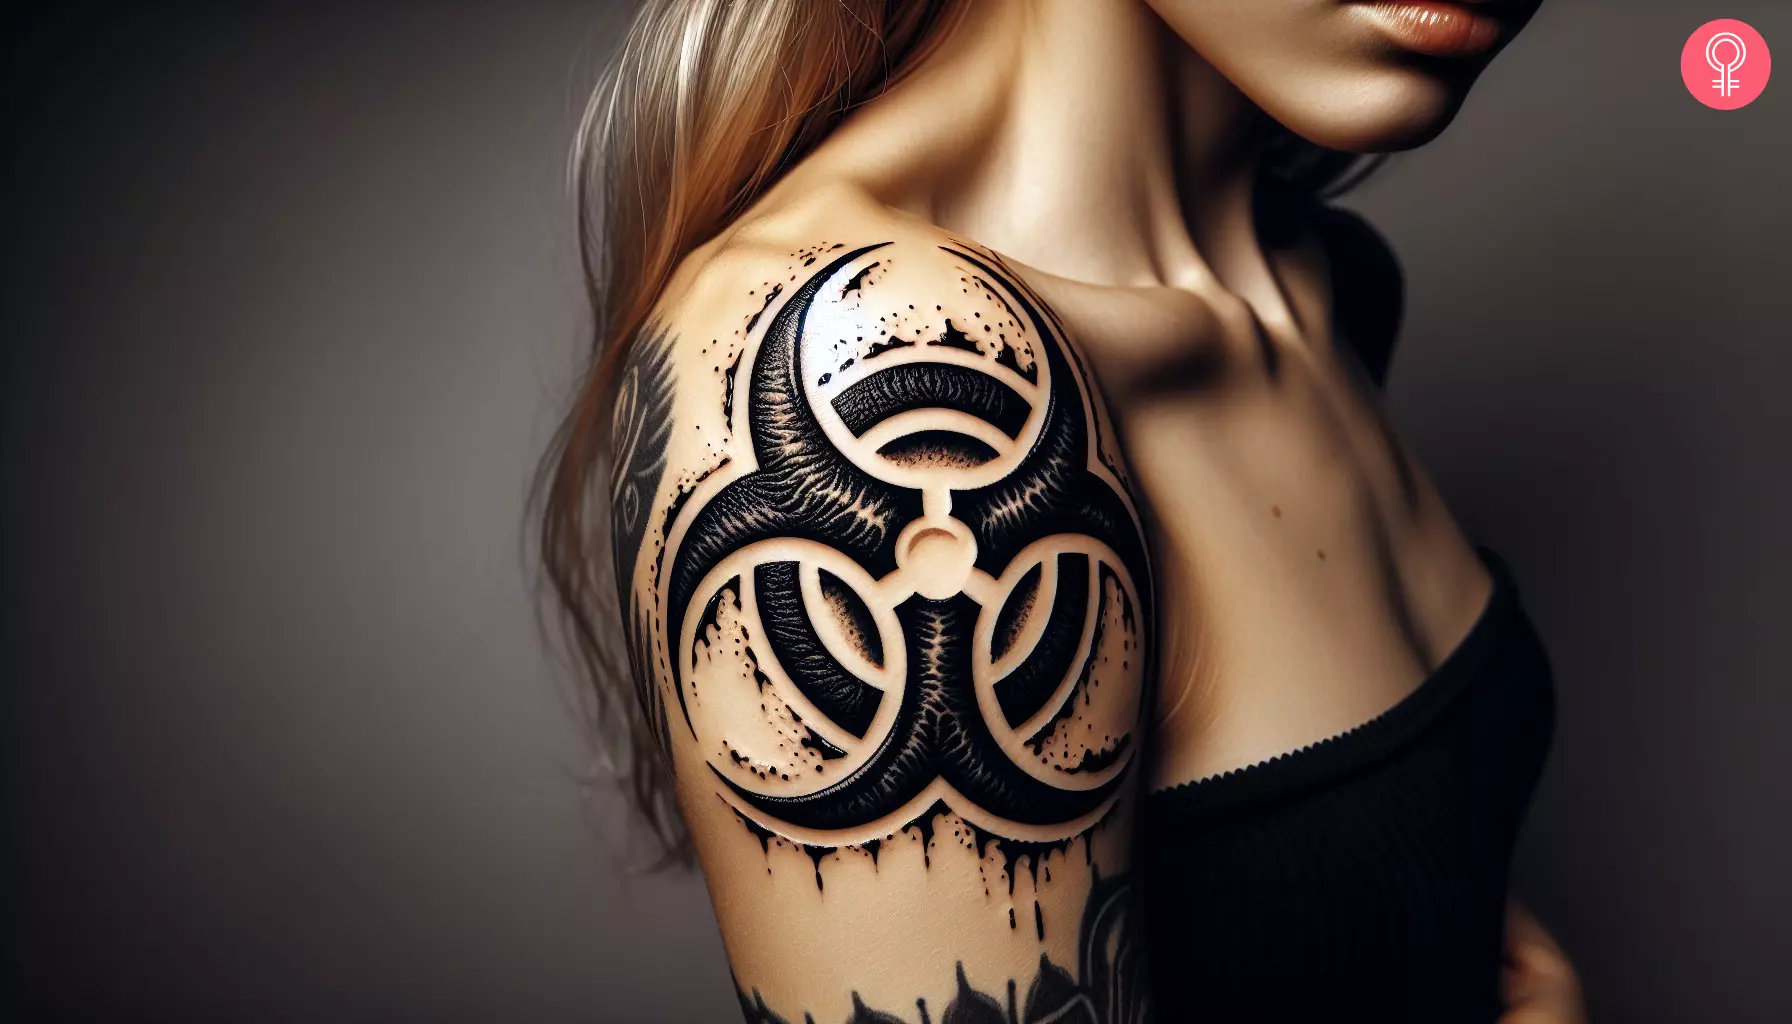 A woman with a black detailed biohazard tattoo on her upper arm